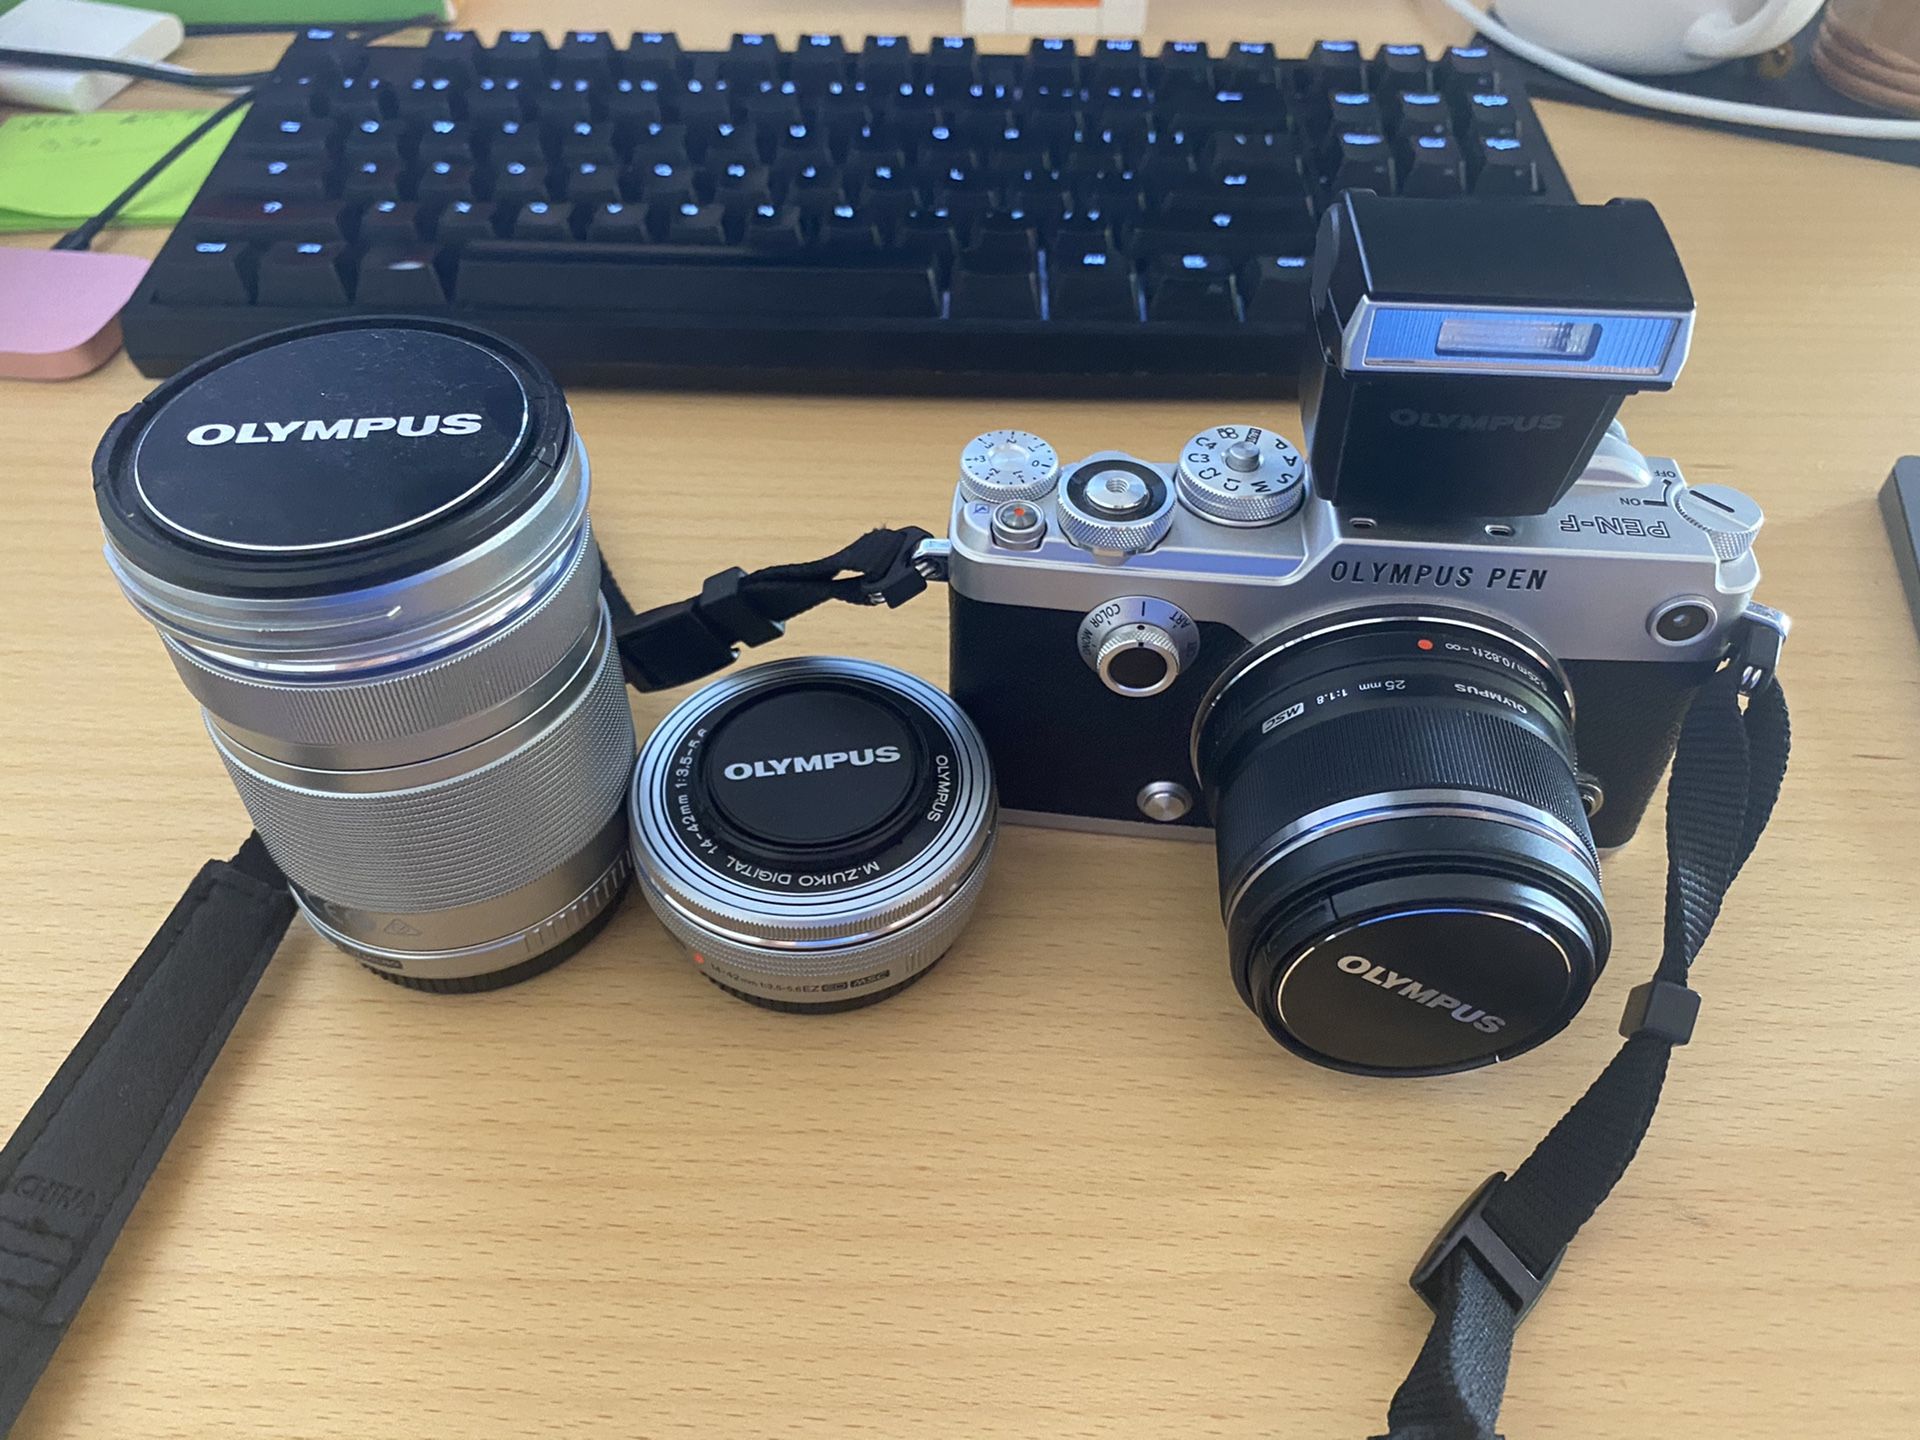 [SCV] Olympus PEN-F with flash + 25mm 14-42mm and 40-15mm lenses $700